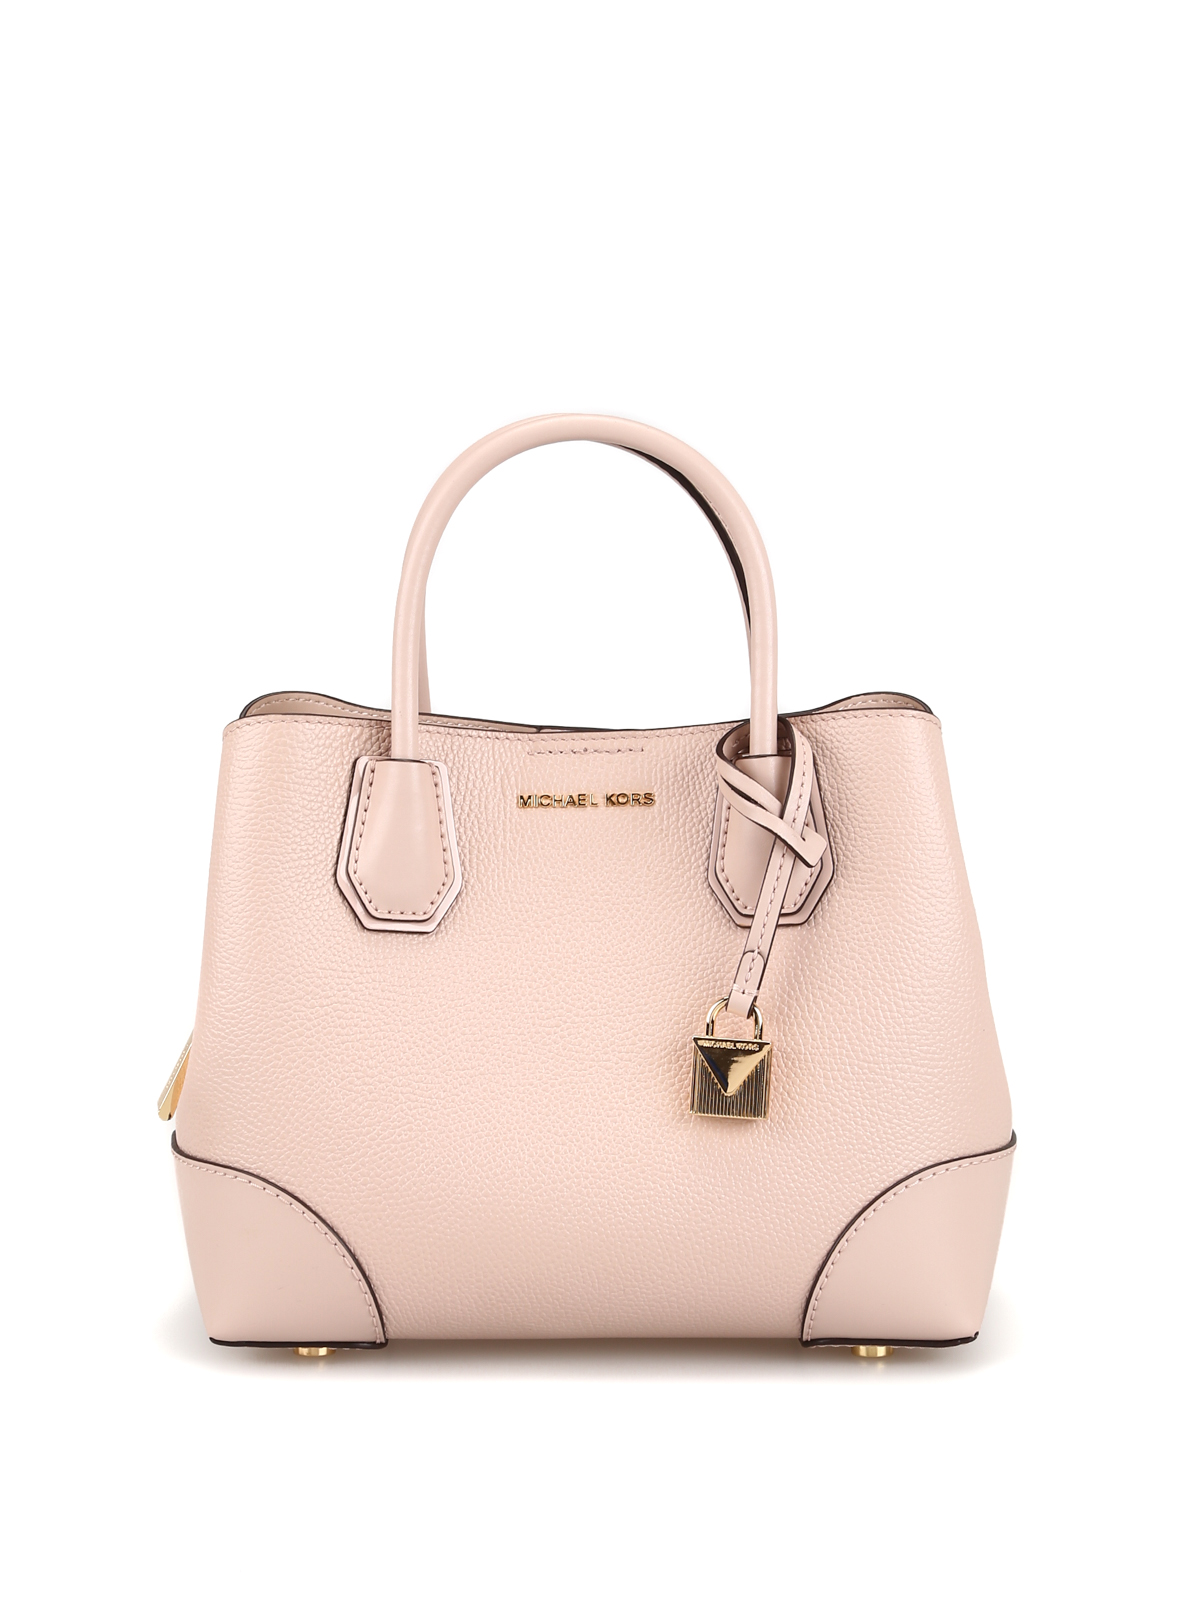 Totes bags Michael Kors - Mercer Gallery soft pink small tote -  30H7GZ5T1T187